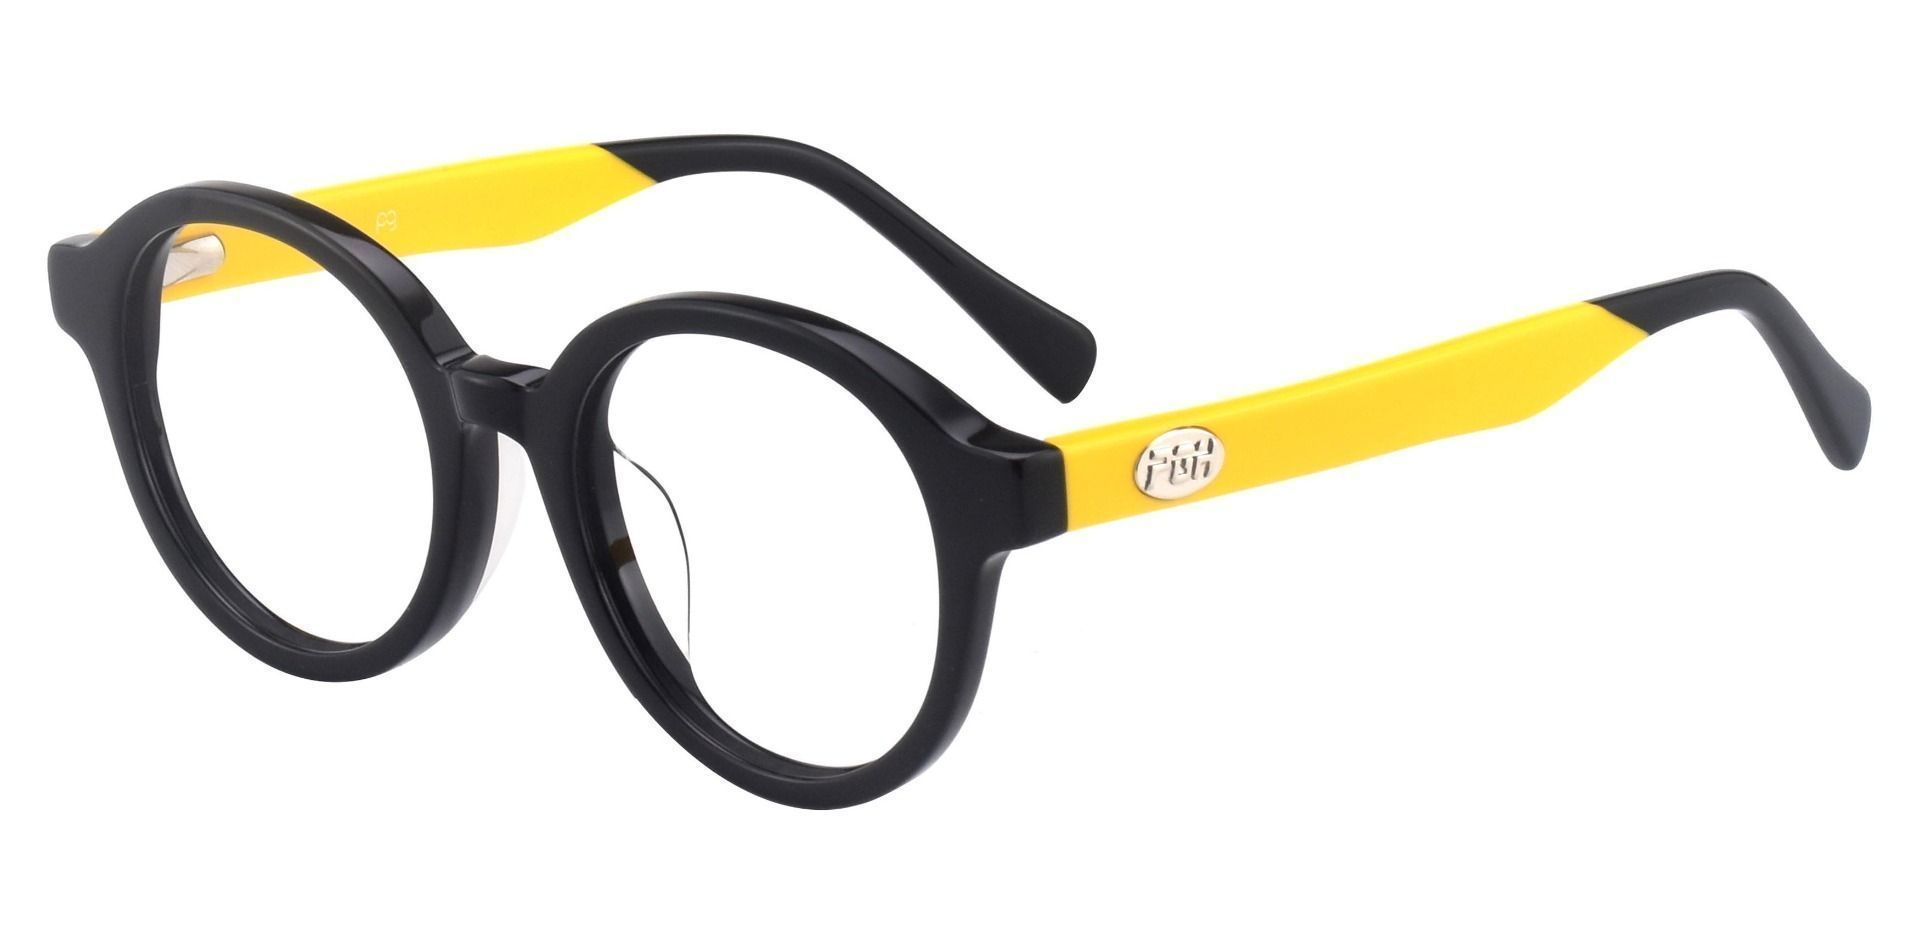 Steel City Round Reading Glasses - The Frame Is Black And Gold